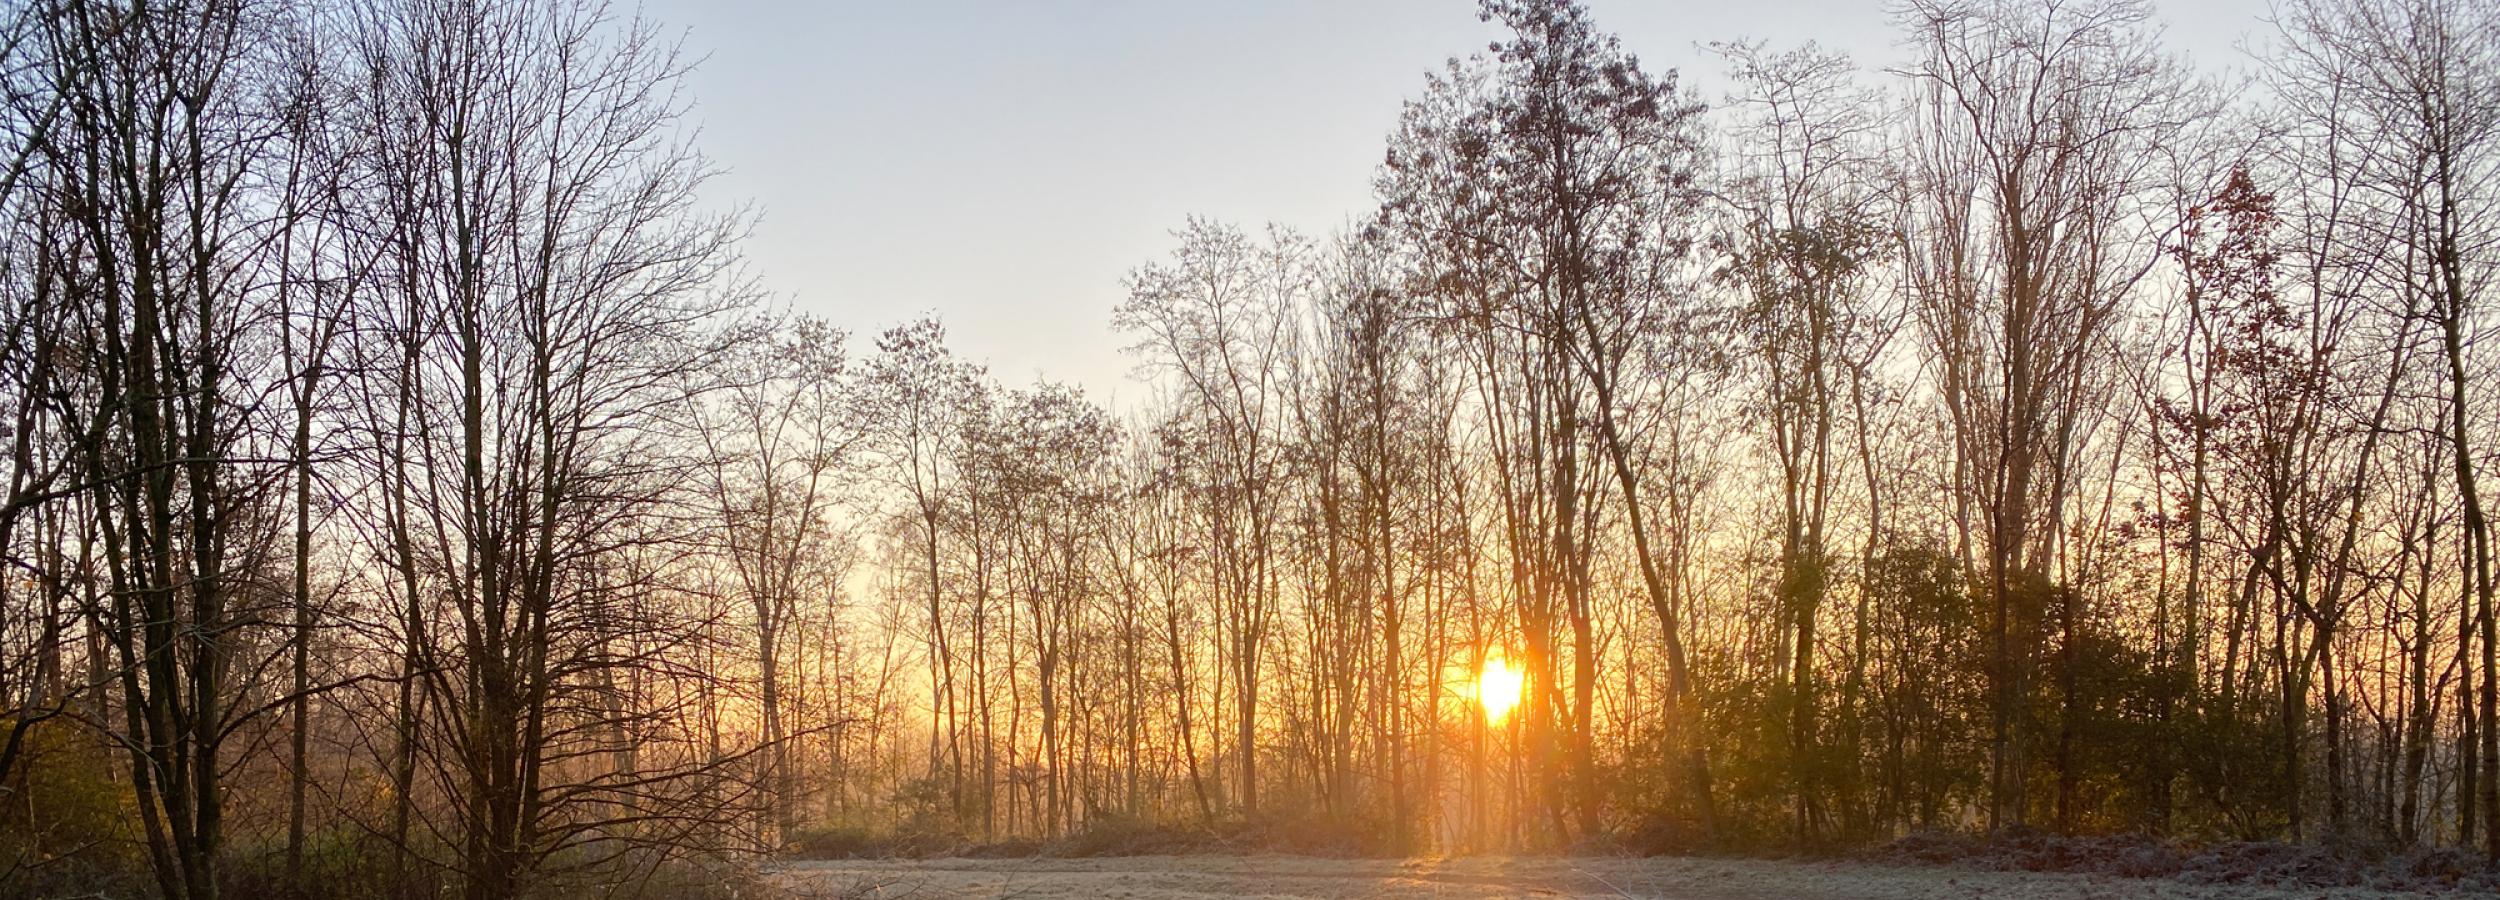 sunrise in a country field in late winter